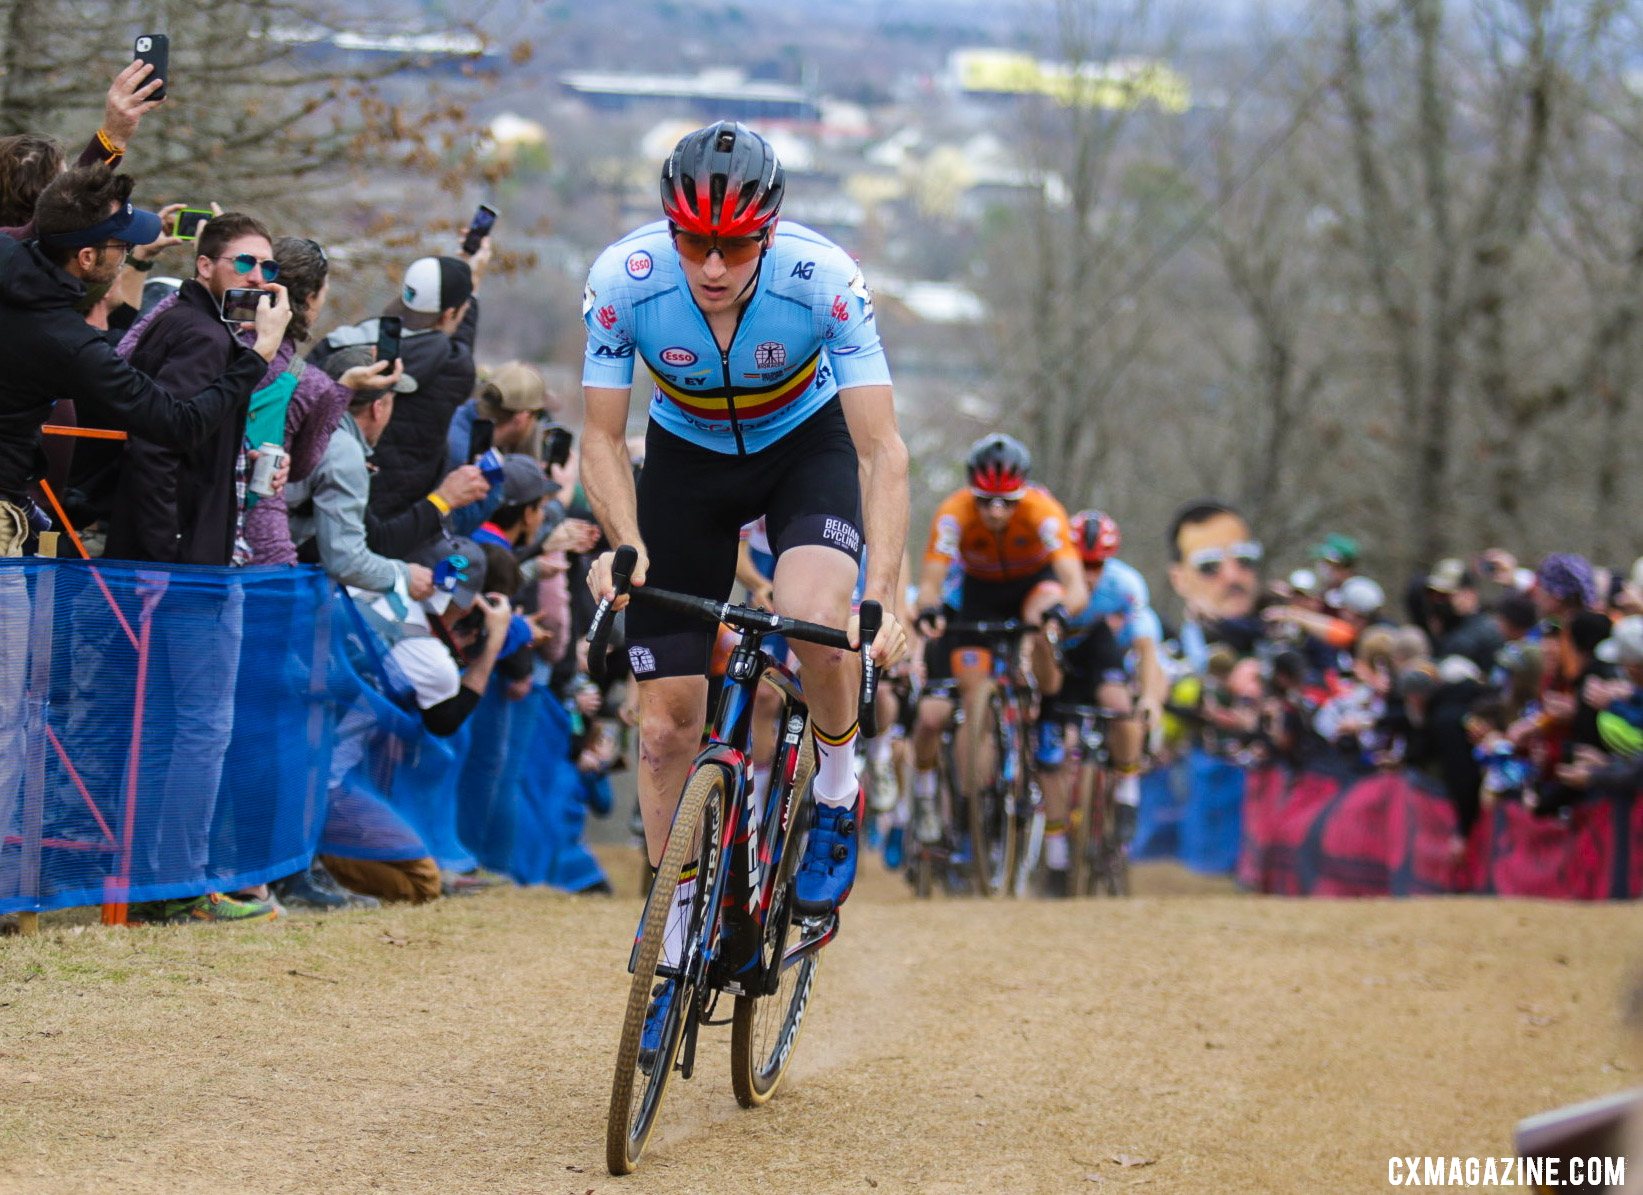 Toon Aerts attacked the first climb in hopes of tiring out Van der Haar and Pidcock. Elite Men. 2022 Cyclocross World Championships, Fayetteville, Arkansas USA. © D. Mable / Cyclocross Magazine